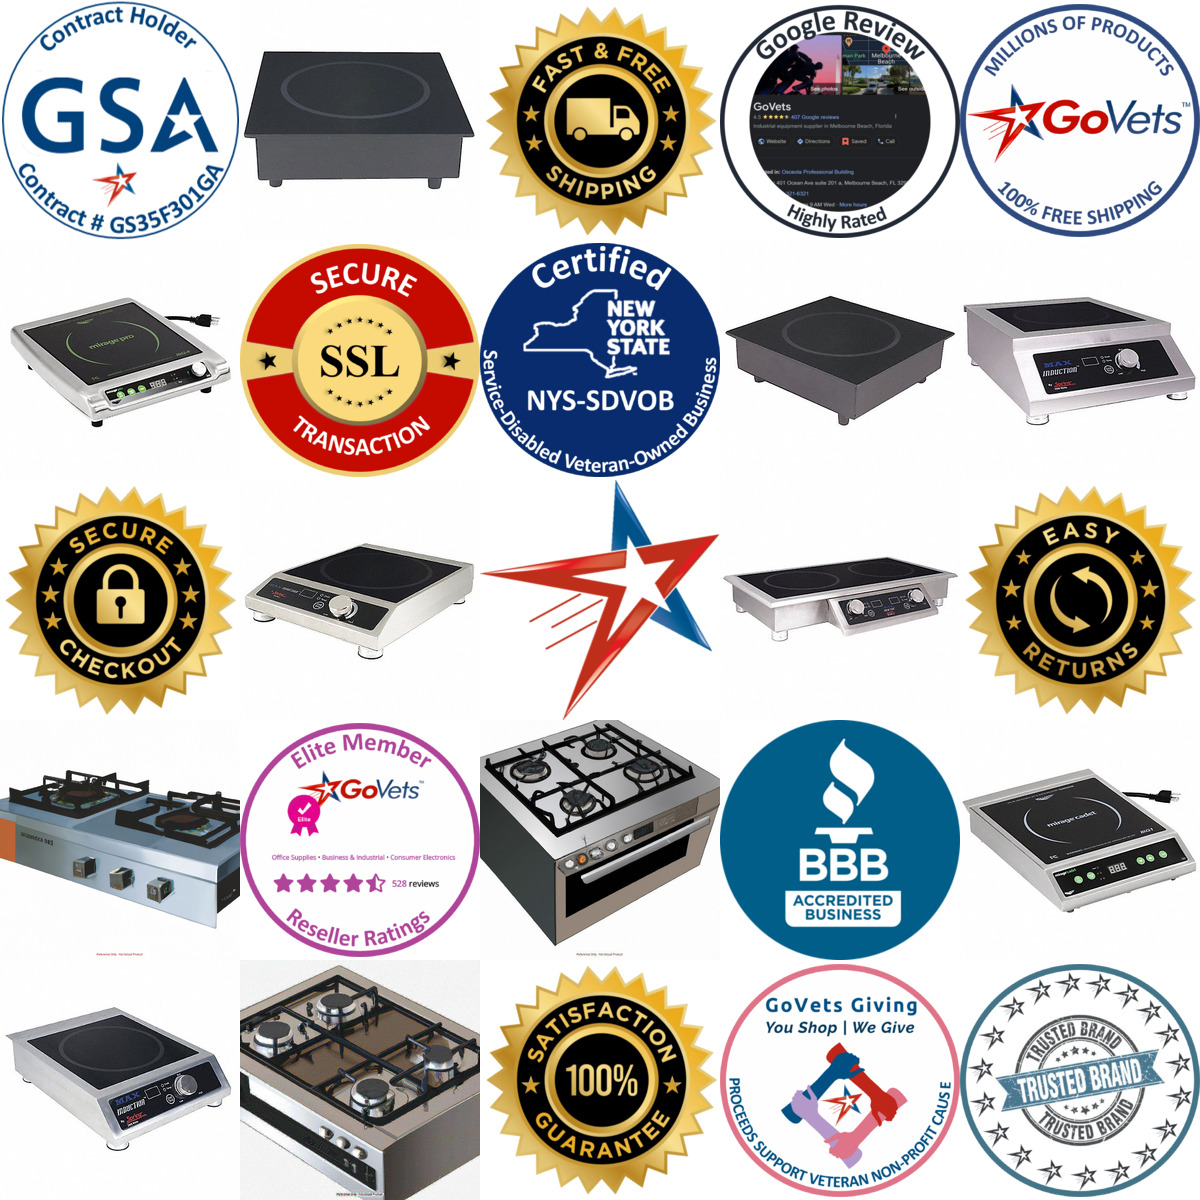 A selection of Induction Ranges products on GoVets